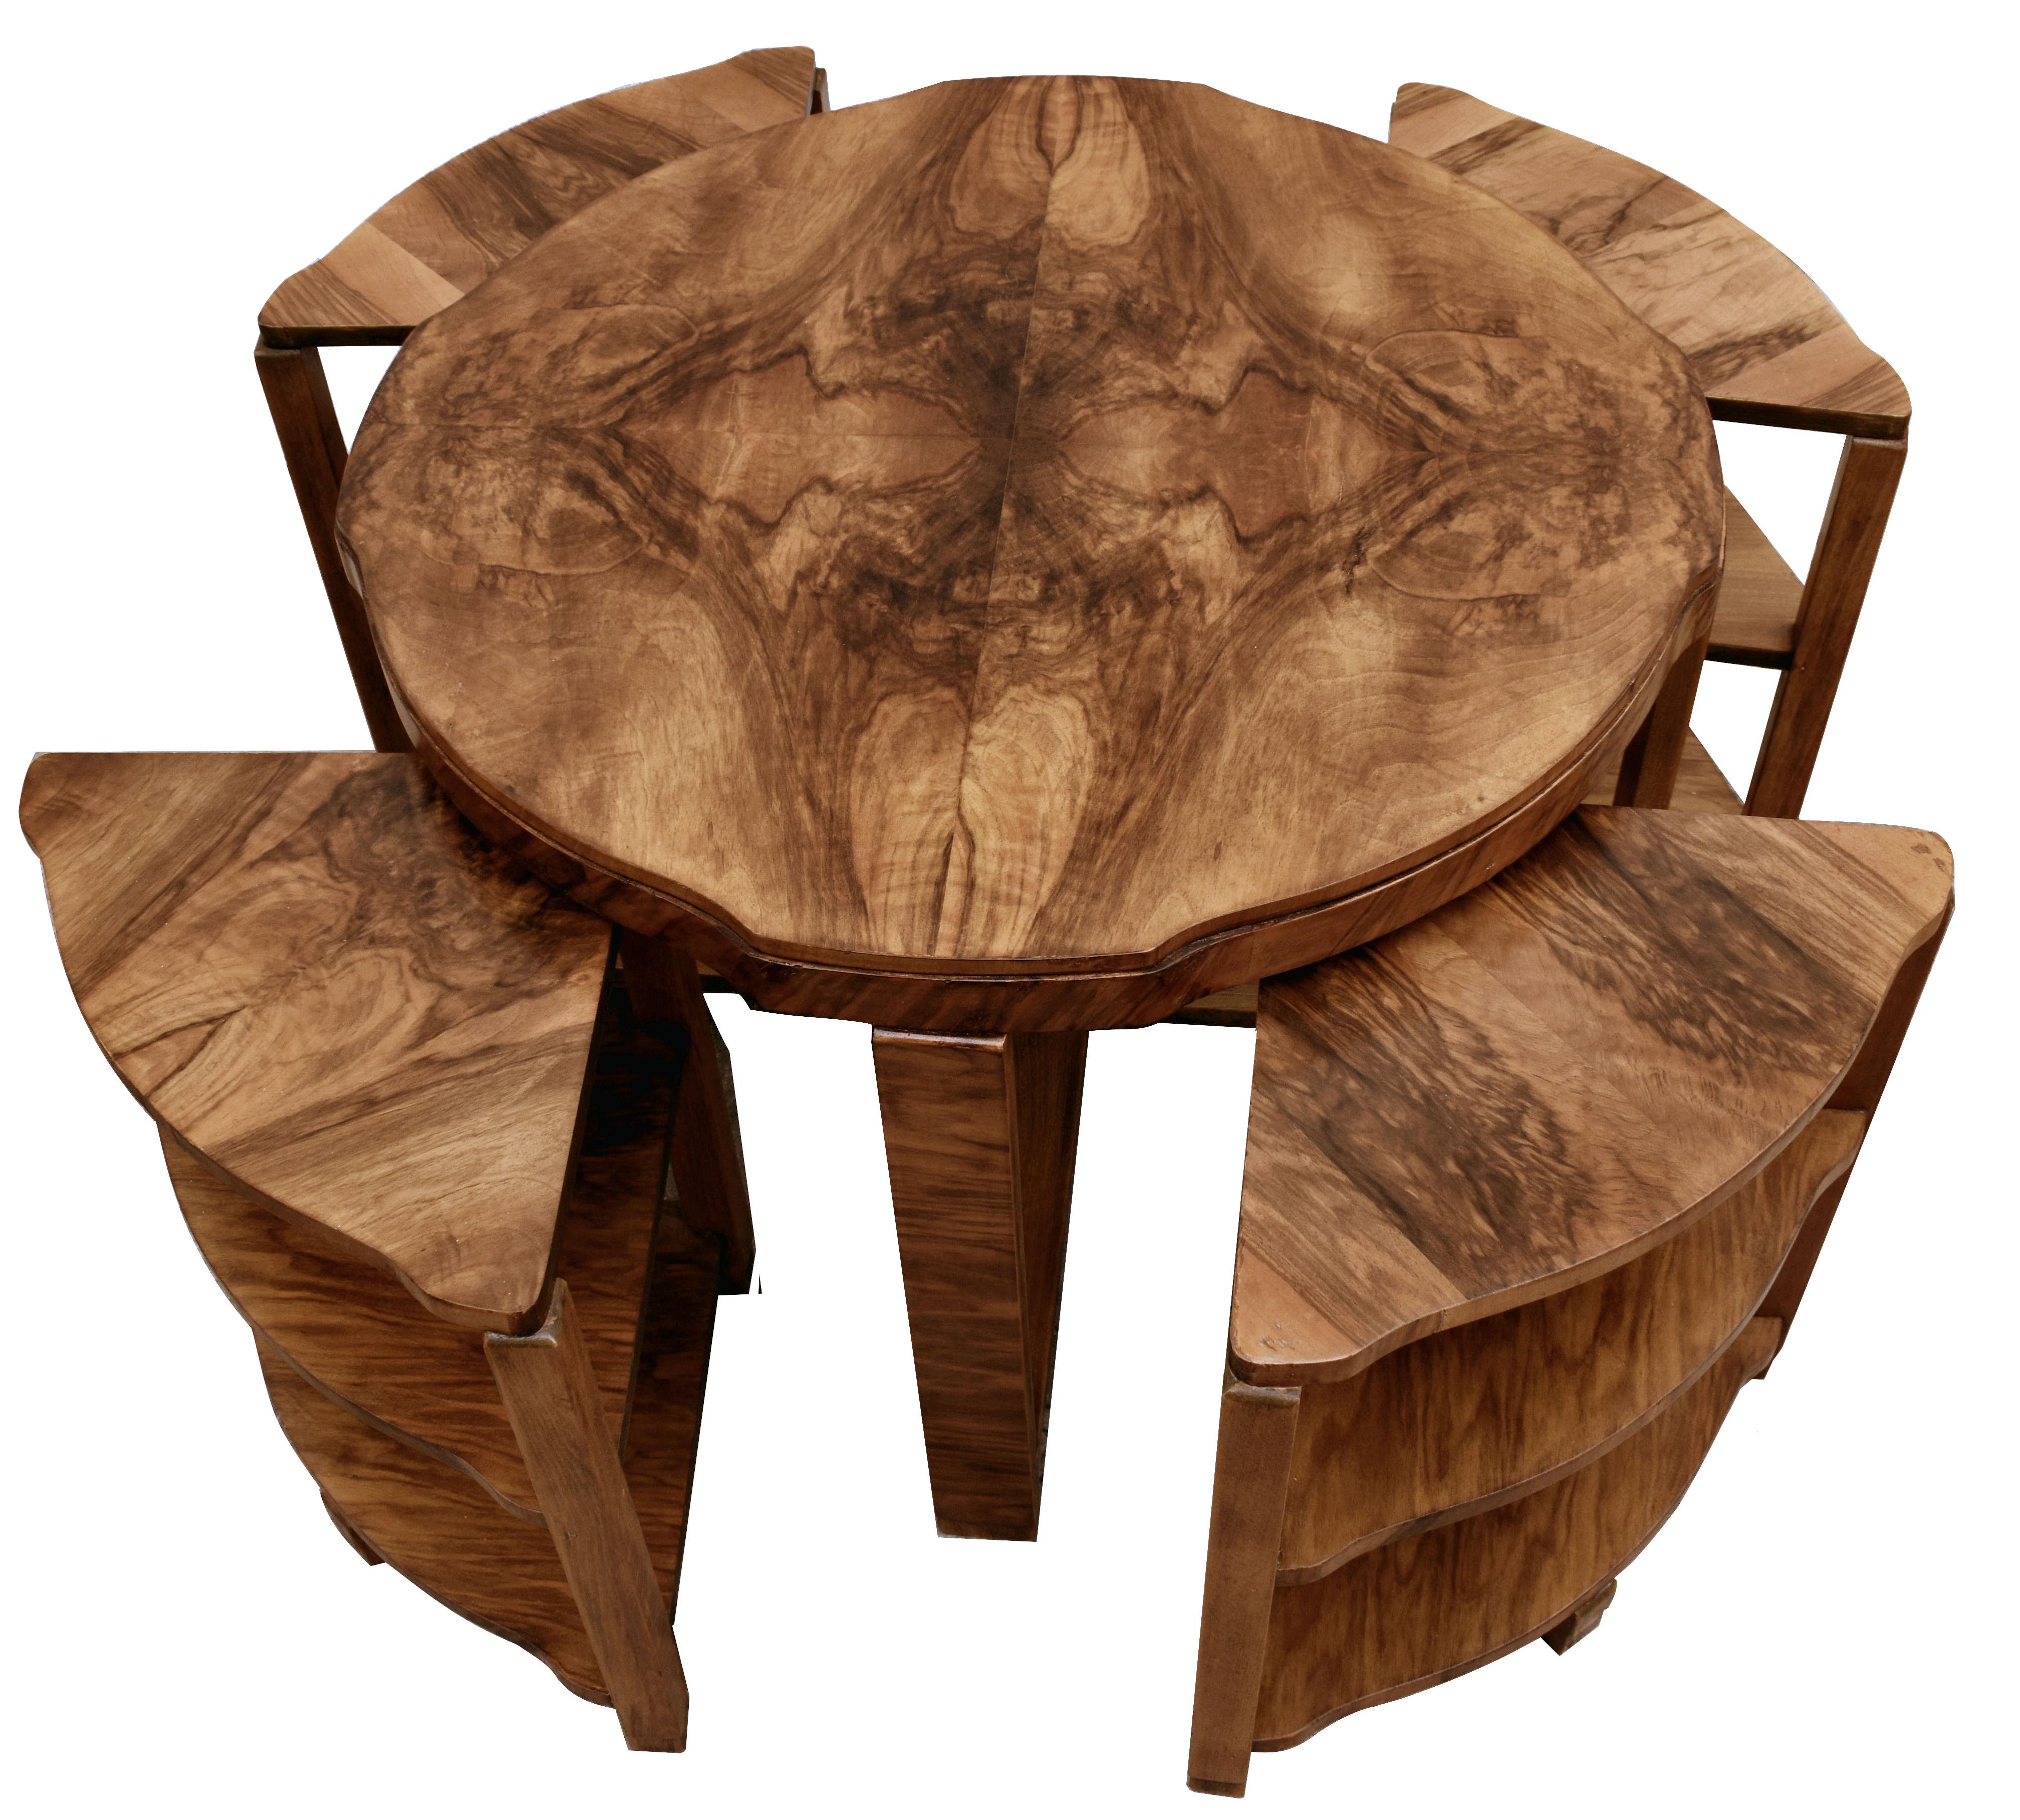 Art Deco High Quality Figured Walnut Quintetto Nest of 5 Tables, English, 1930 For Sale 3